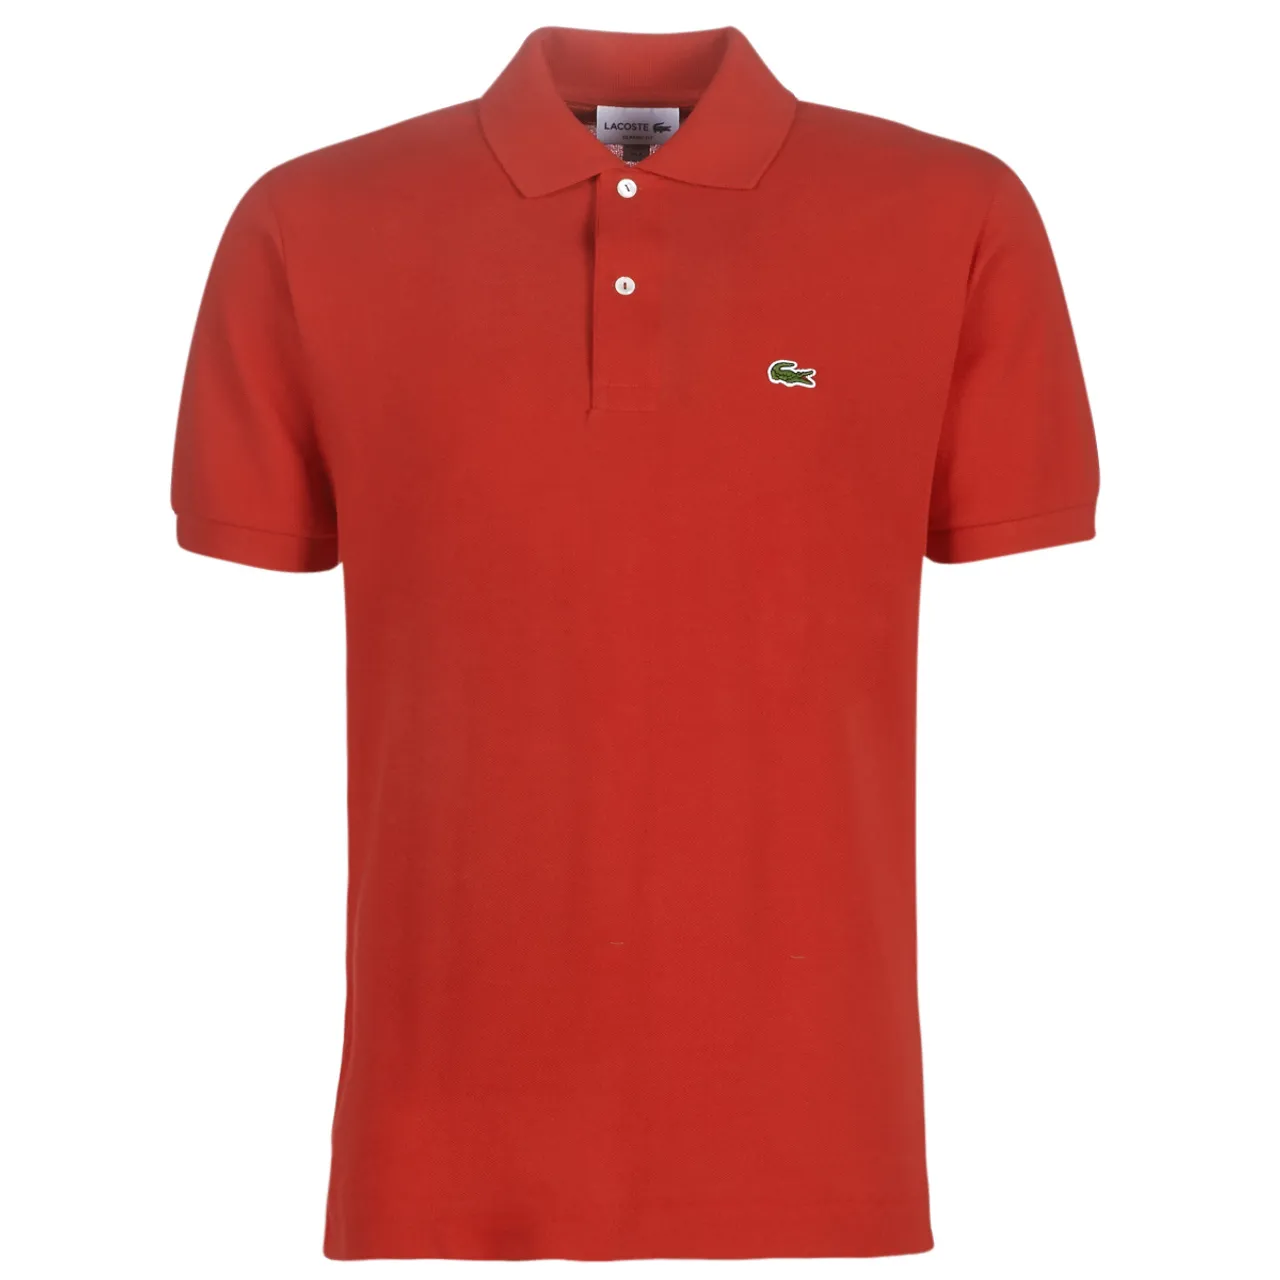 Lacoste  POLO L12 12 REGULAR  men's Polo shirt in Red